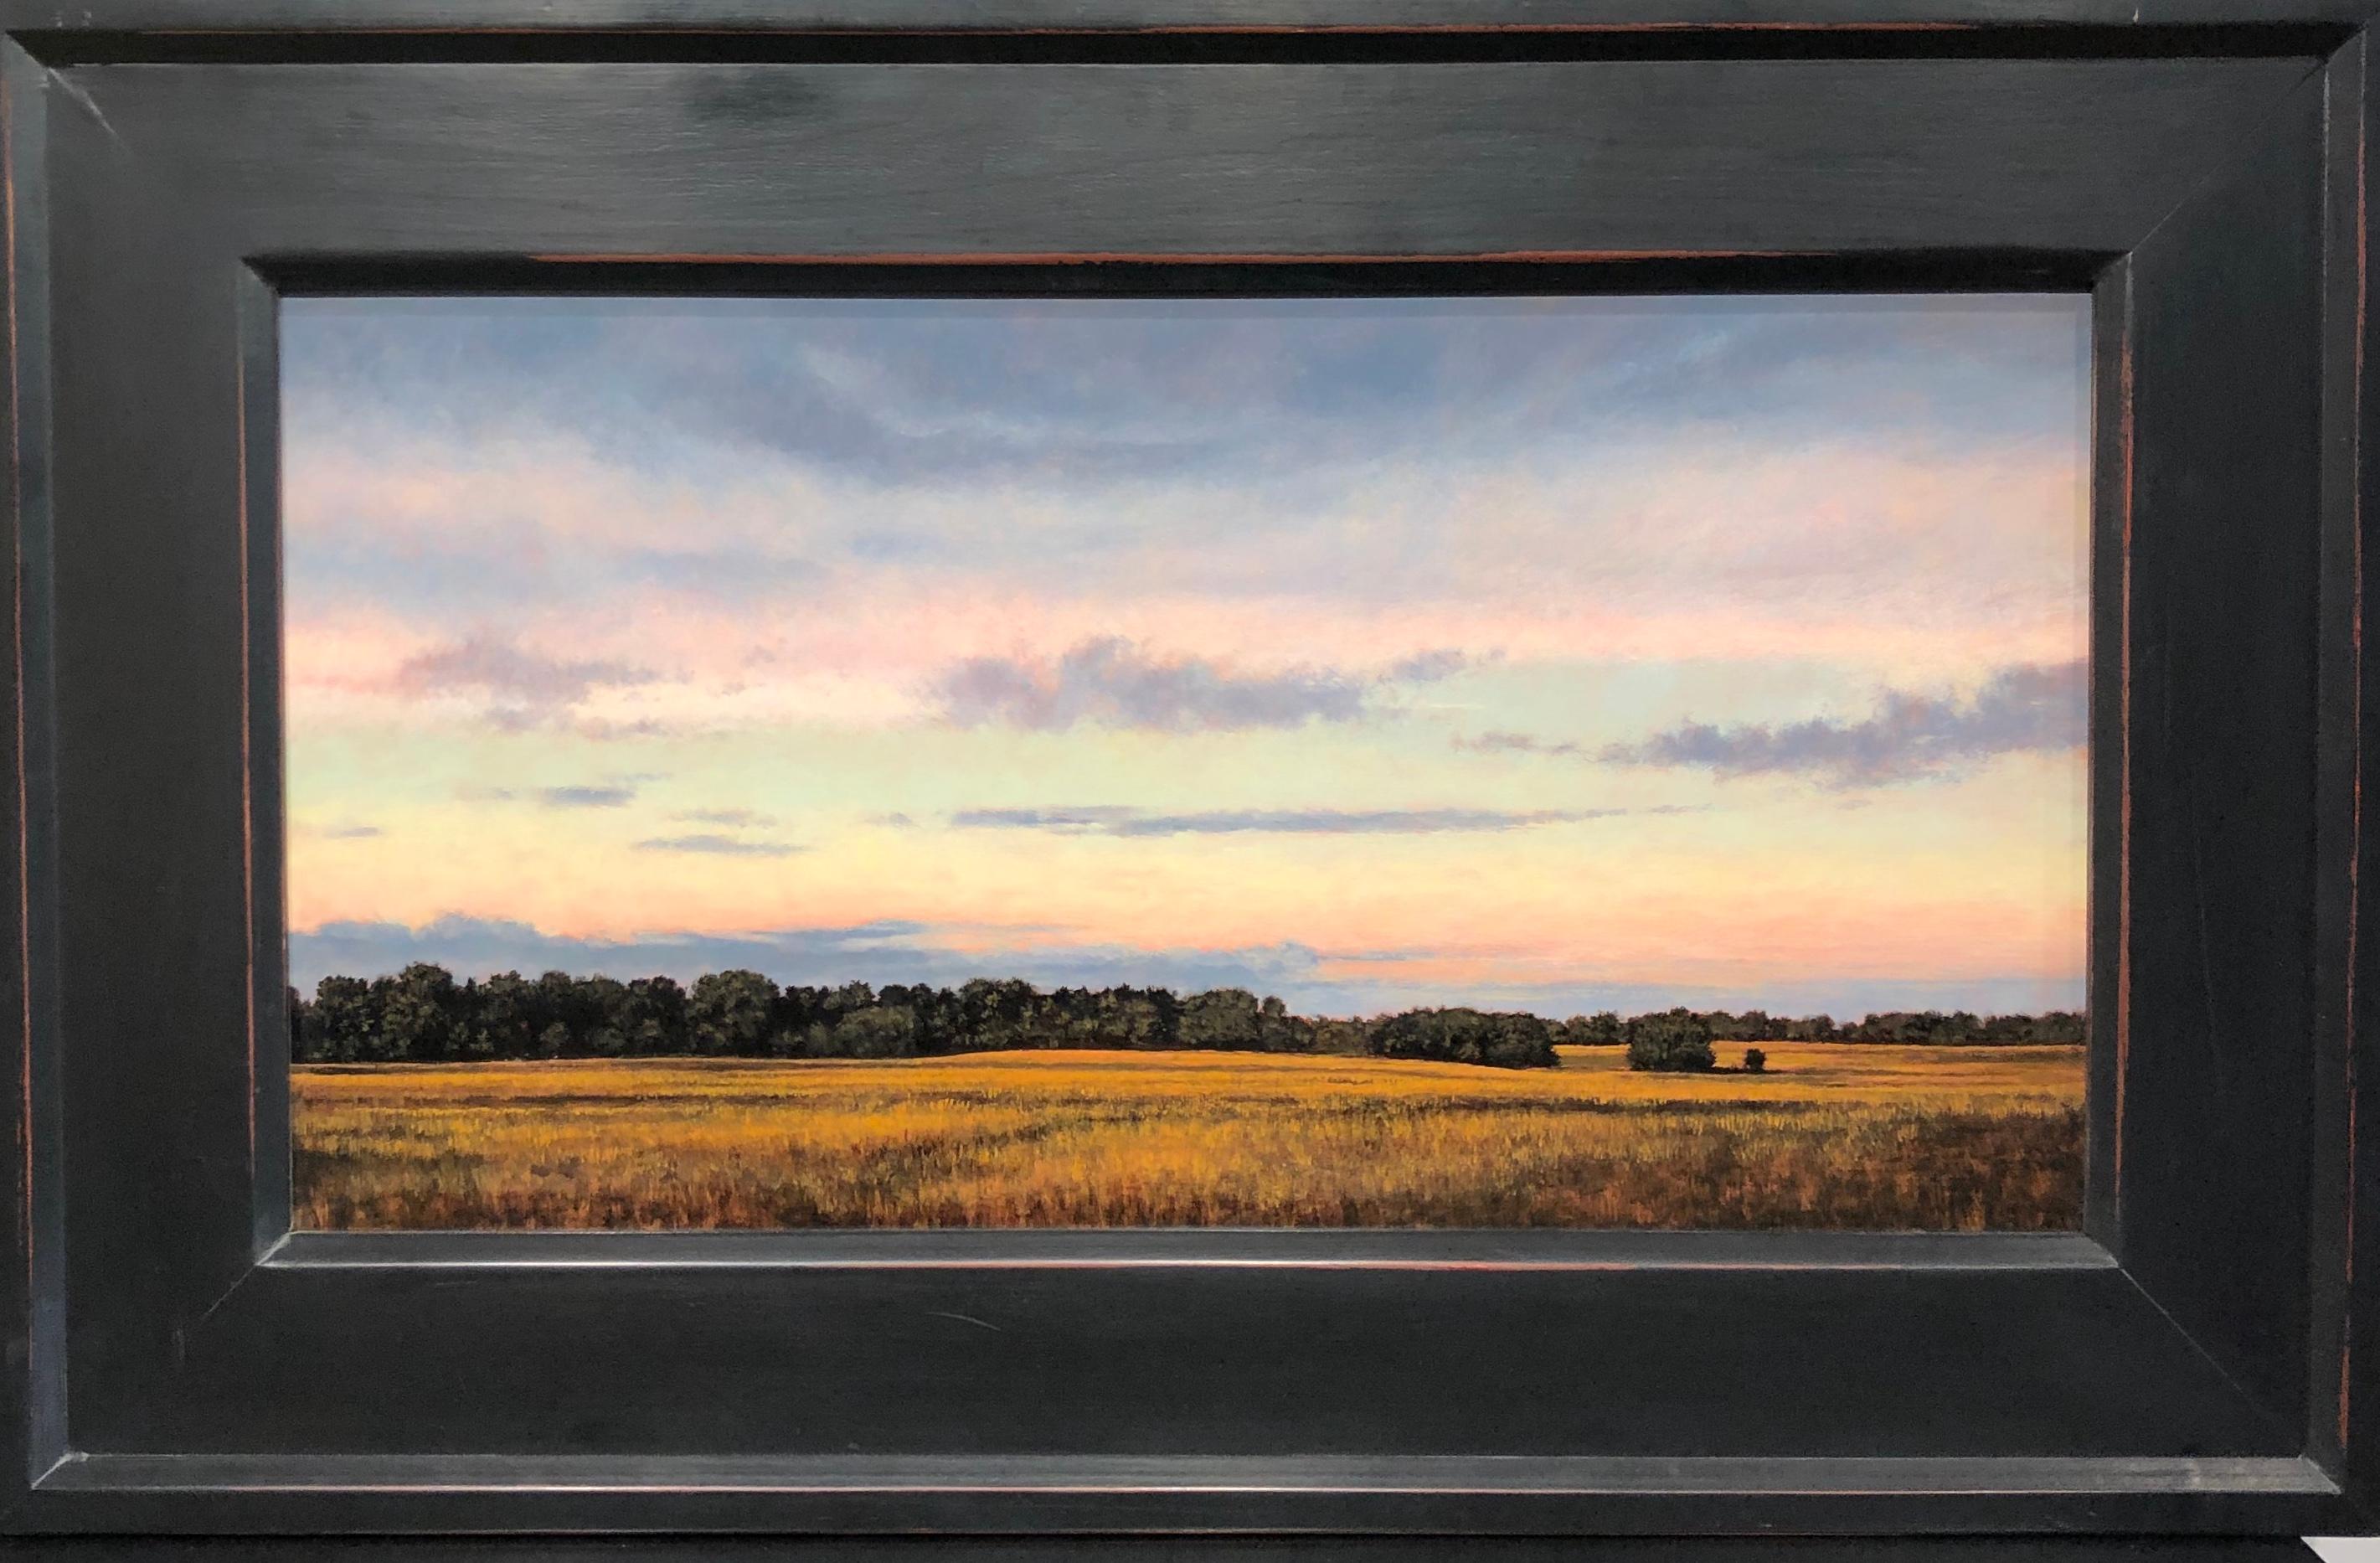 Meadow, Twilight, Pastoral Landscape at Dusk, Oil on Panel, Framed - Painting by Jeff Aeling